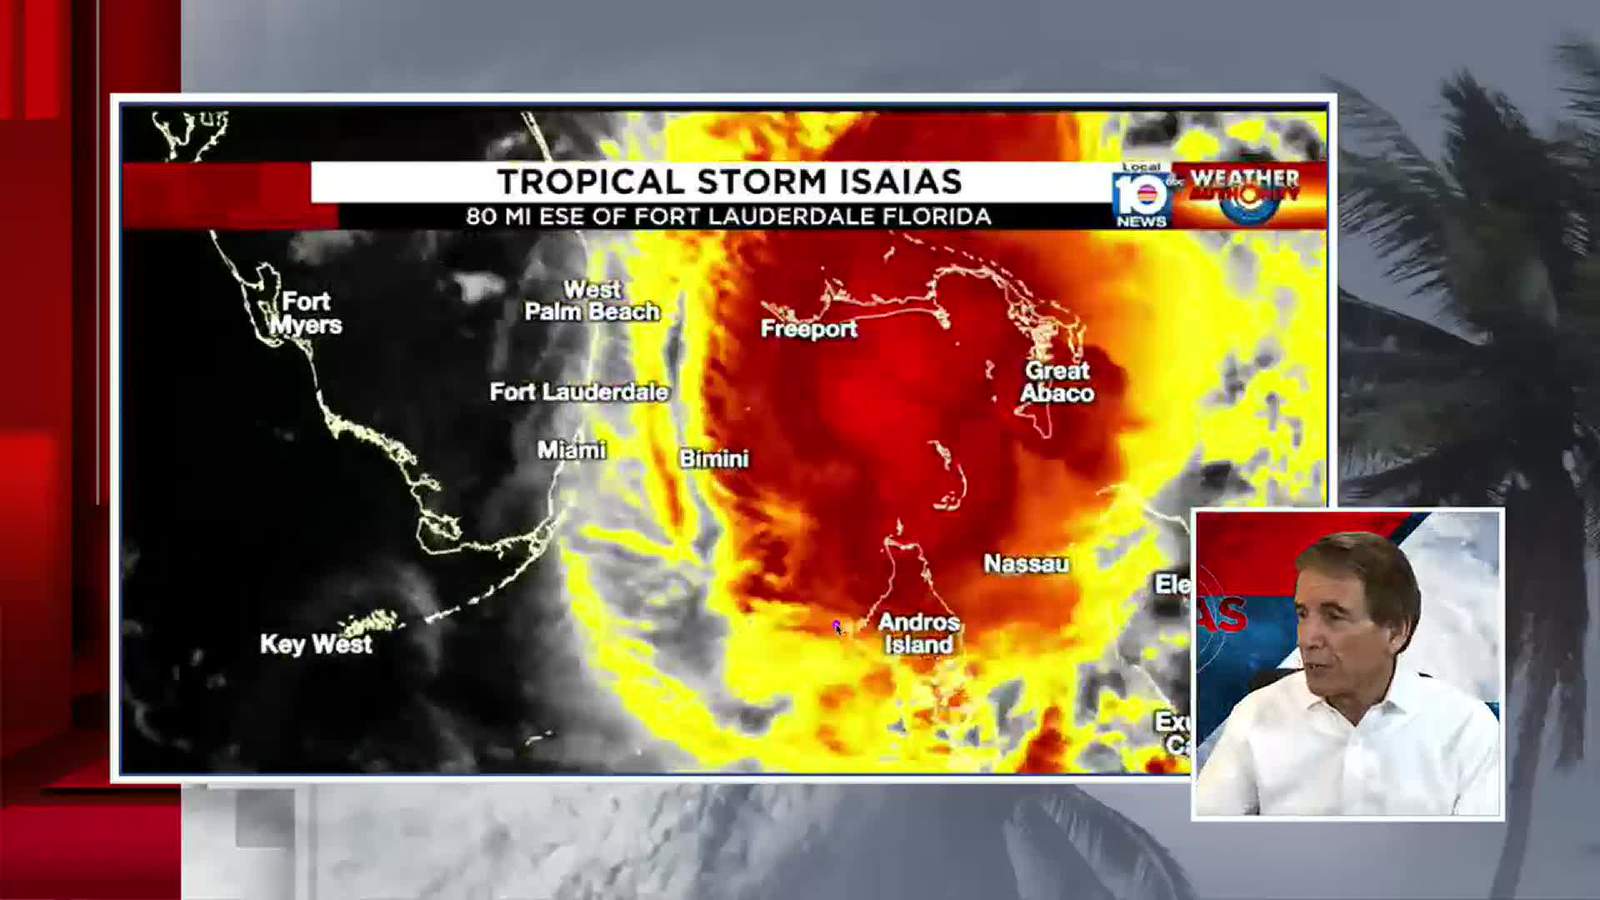 Norcross: Tropical Storm Isaias takes a slight turn to West, not much change for SE Florida